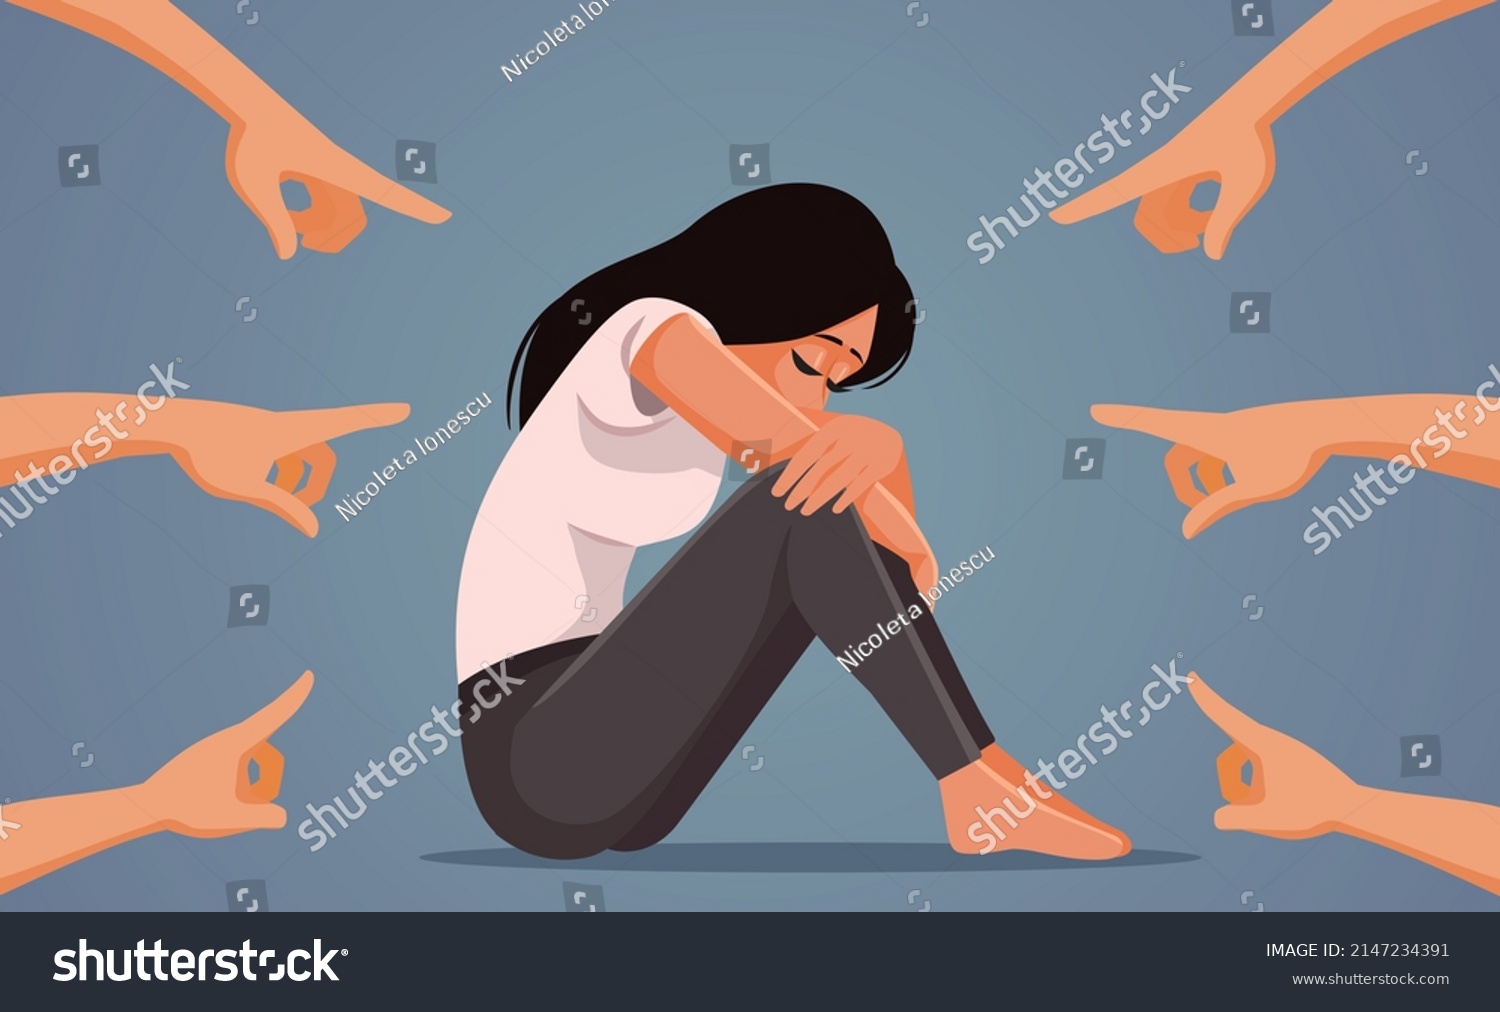 
Society Wrongly Blaming the Victim Concept Vector Illustration. Misogyny in public space and prejudice against women by judging and criticizing 
 #2147234391